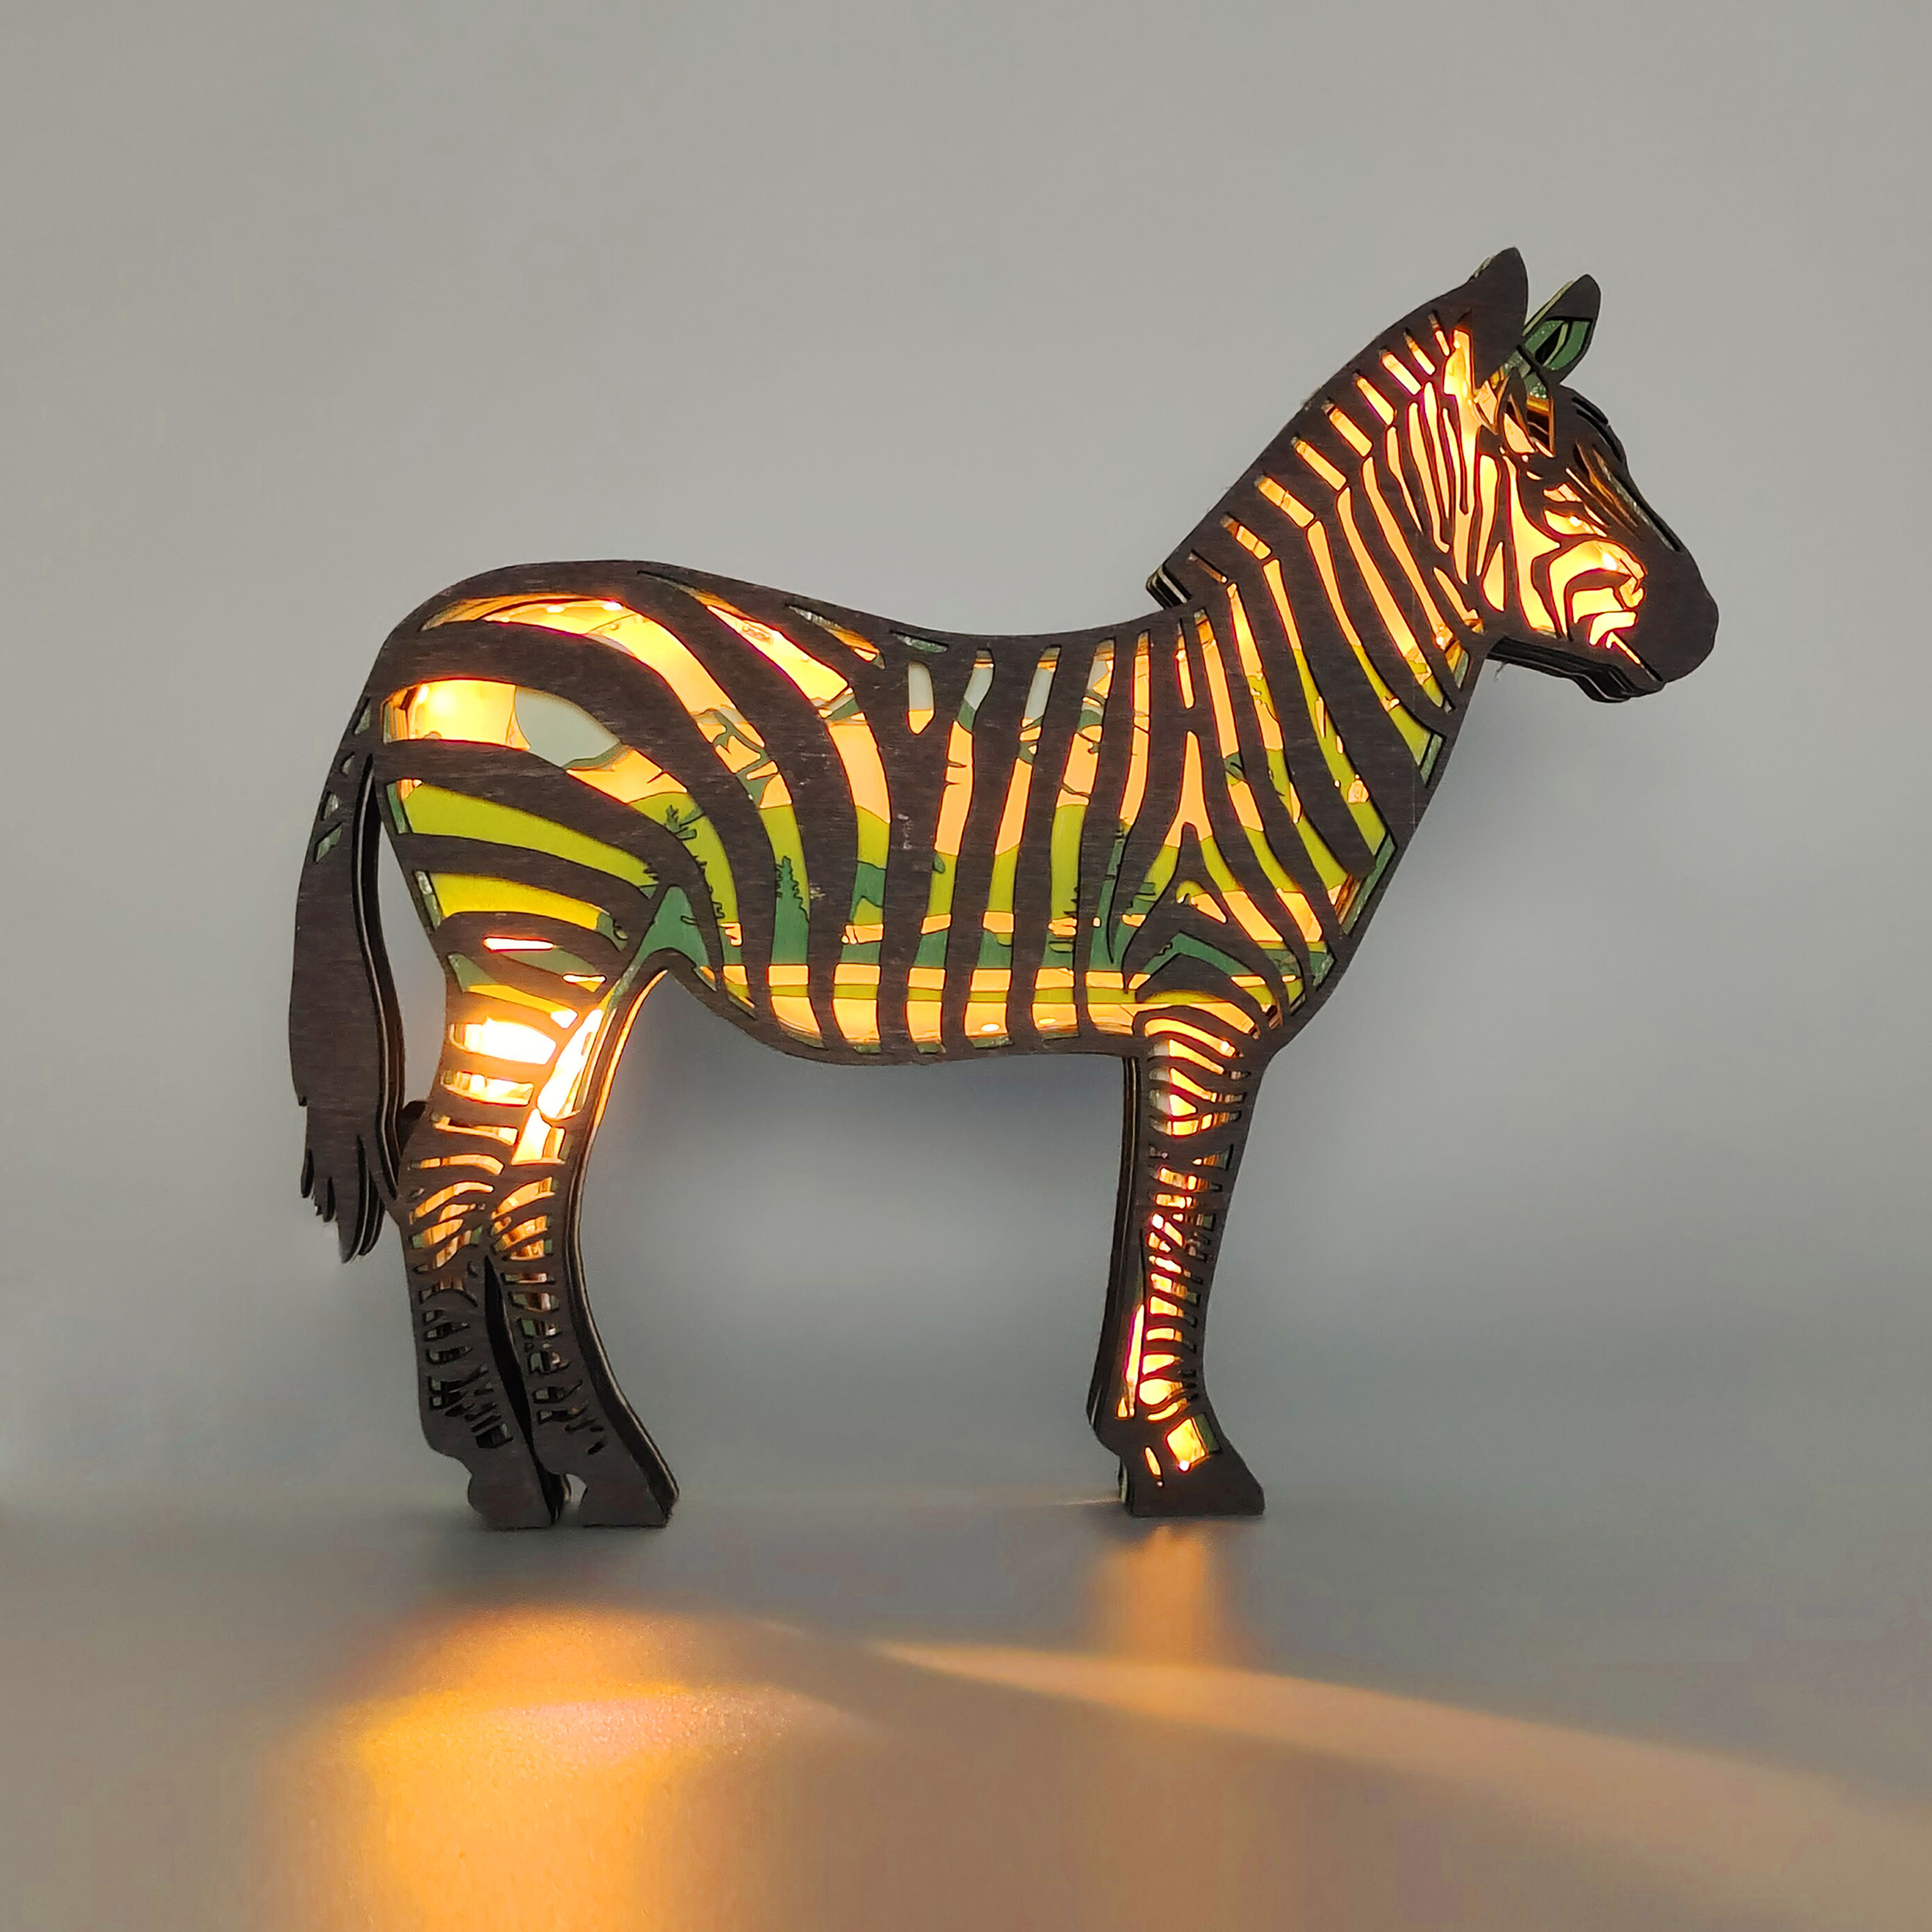 Zebra Carving Handcraft Gift,Valentine's Day Gift,Gift for Wife, home